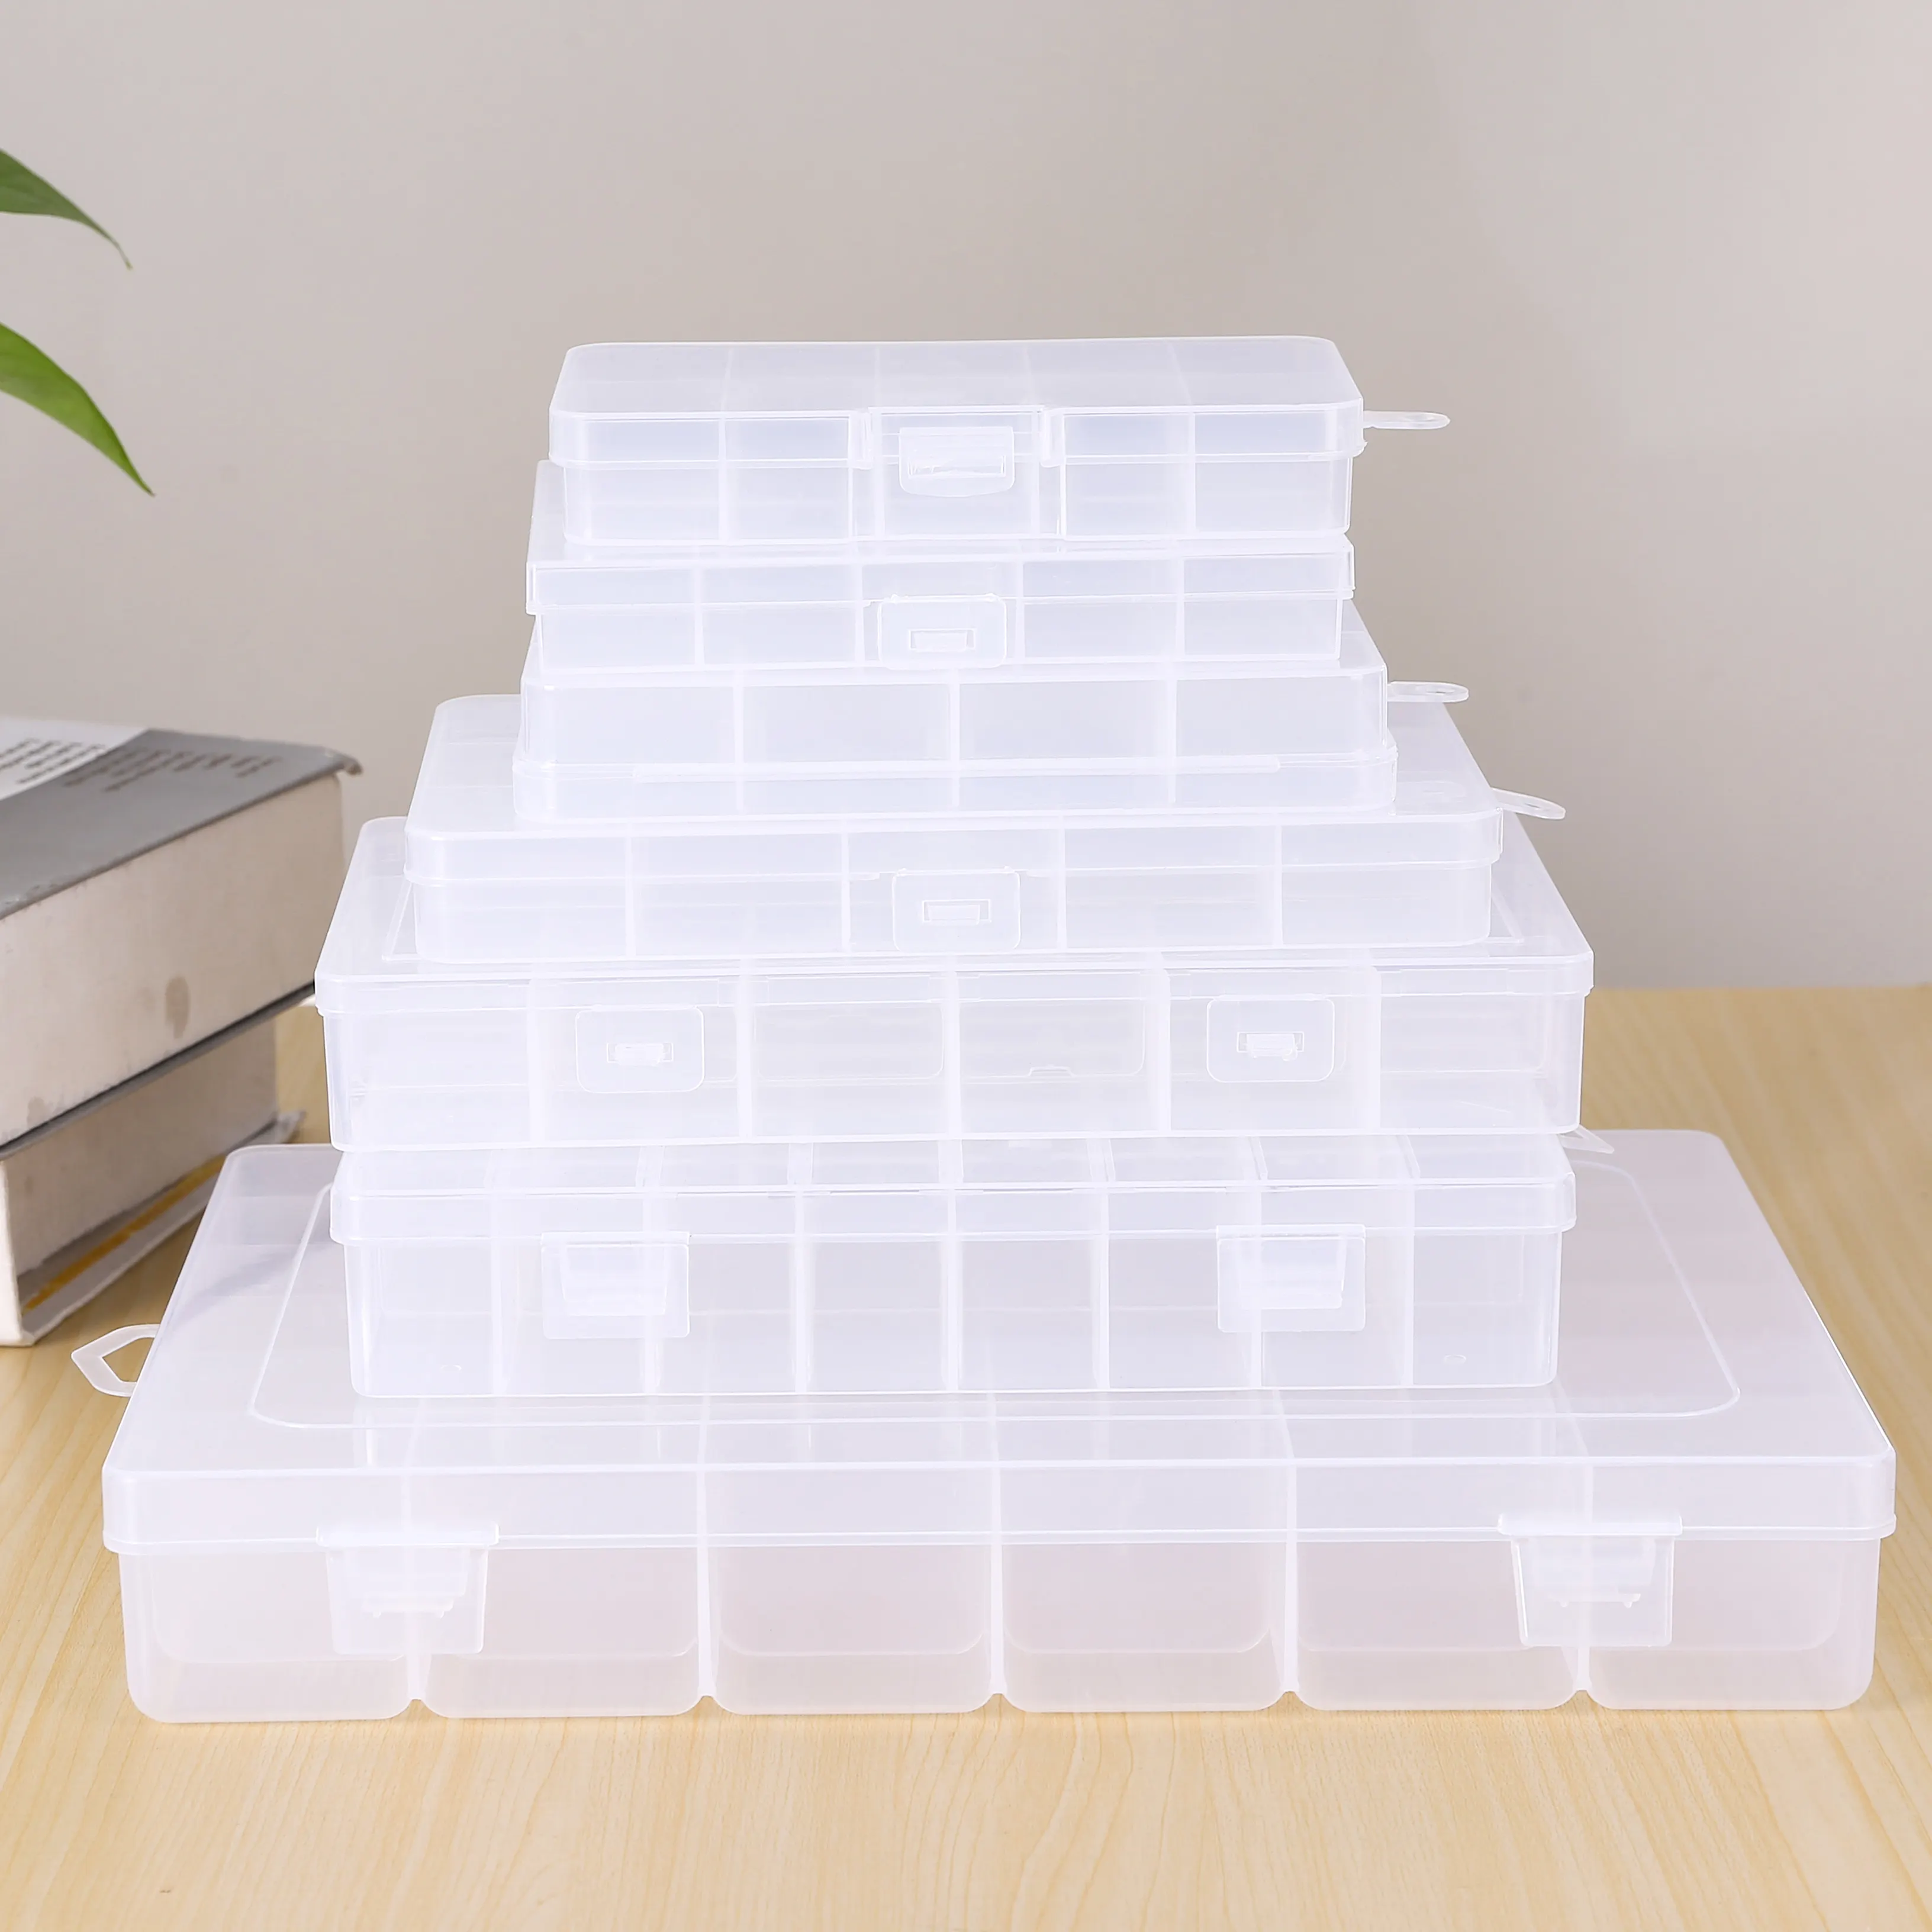 Portable 10/15/24/36 Grids Clear plastic packaging box for Beads Organizer Art DIY Crafts Jewelry Fishing Tackles Container